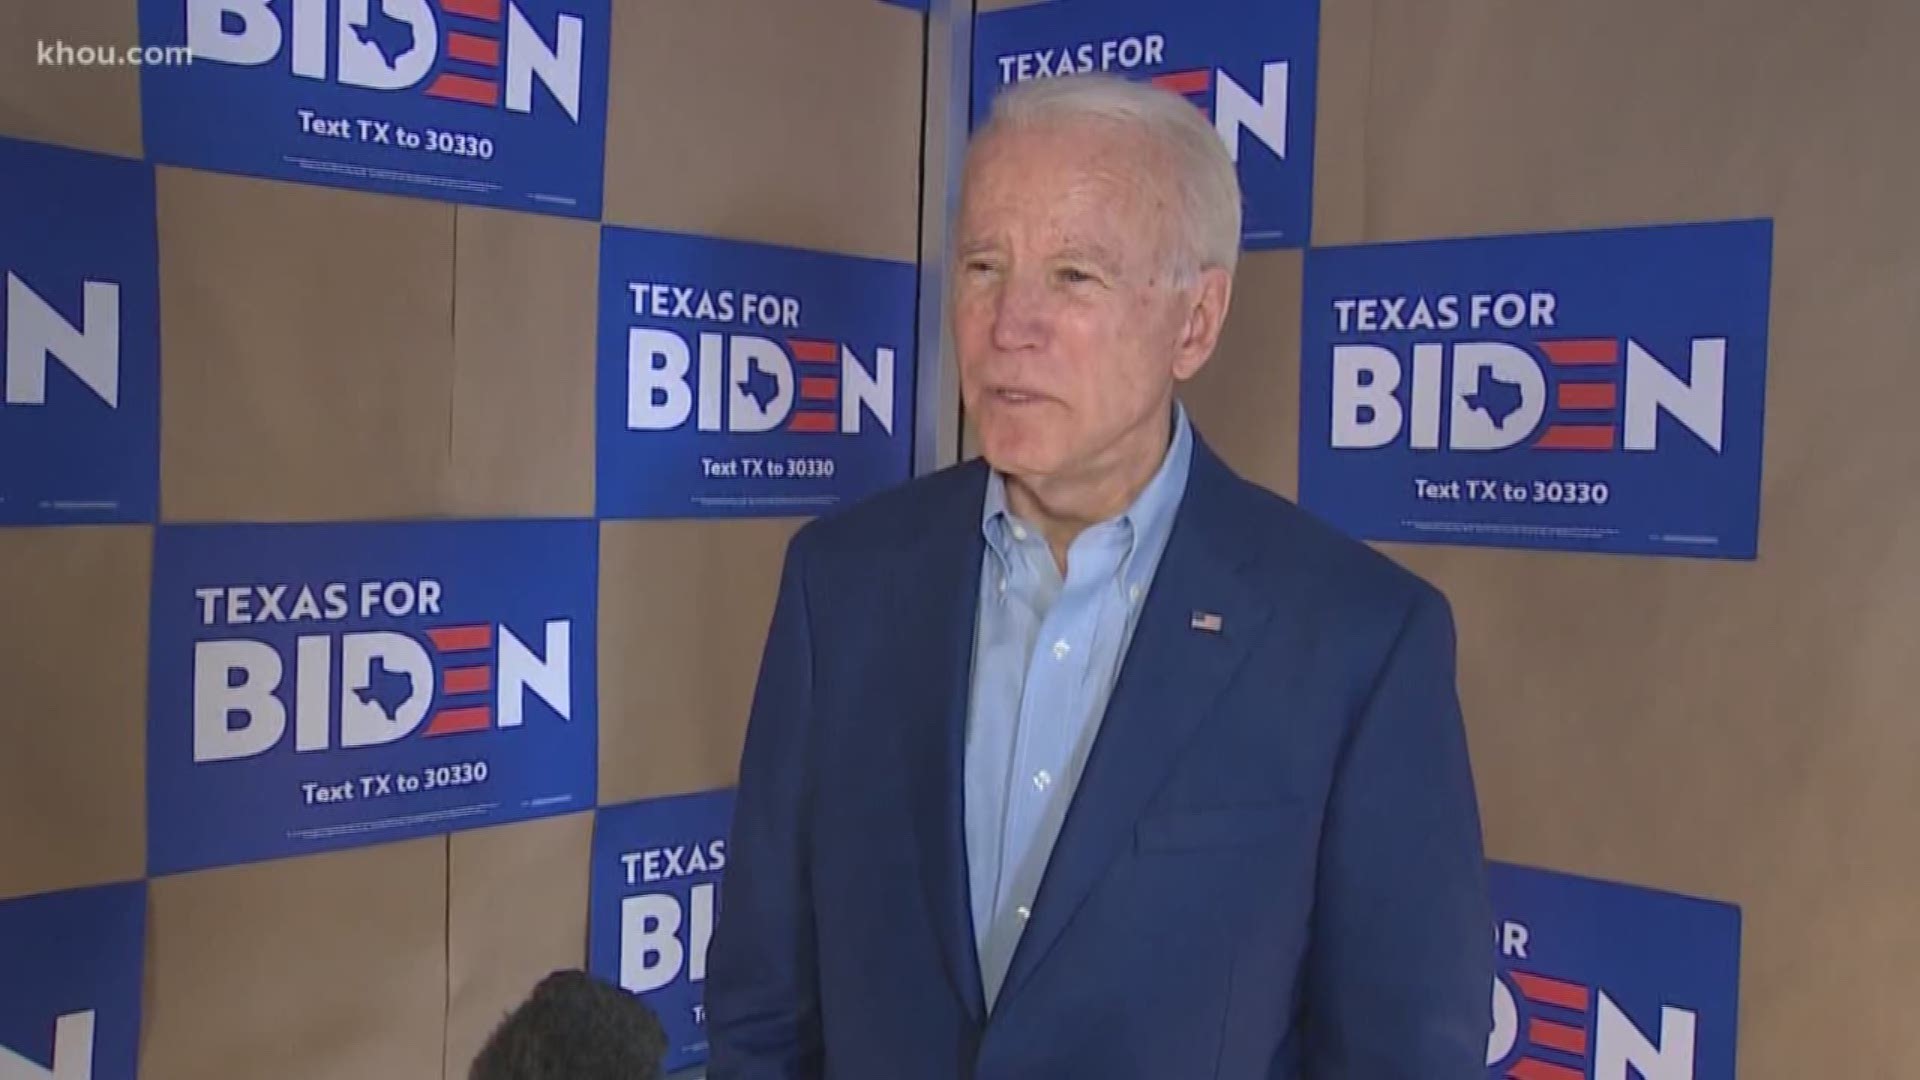 The former vice president brought his campaign to Houston on Monday.